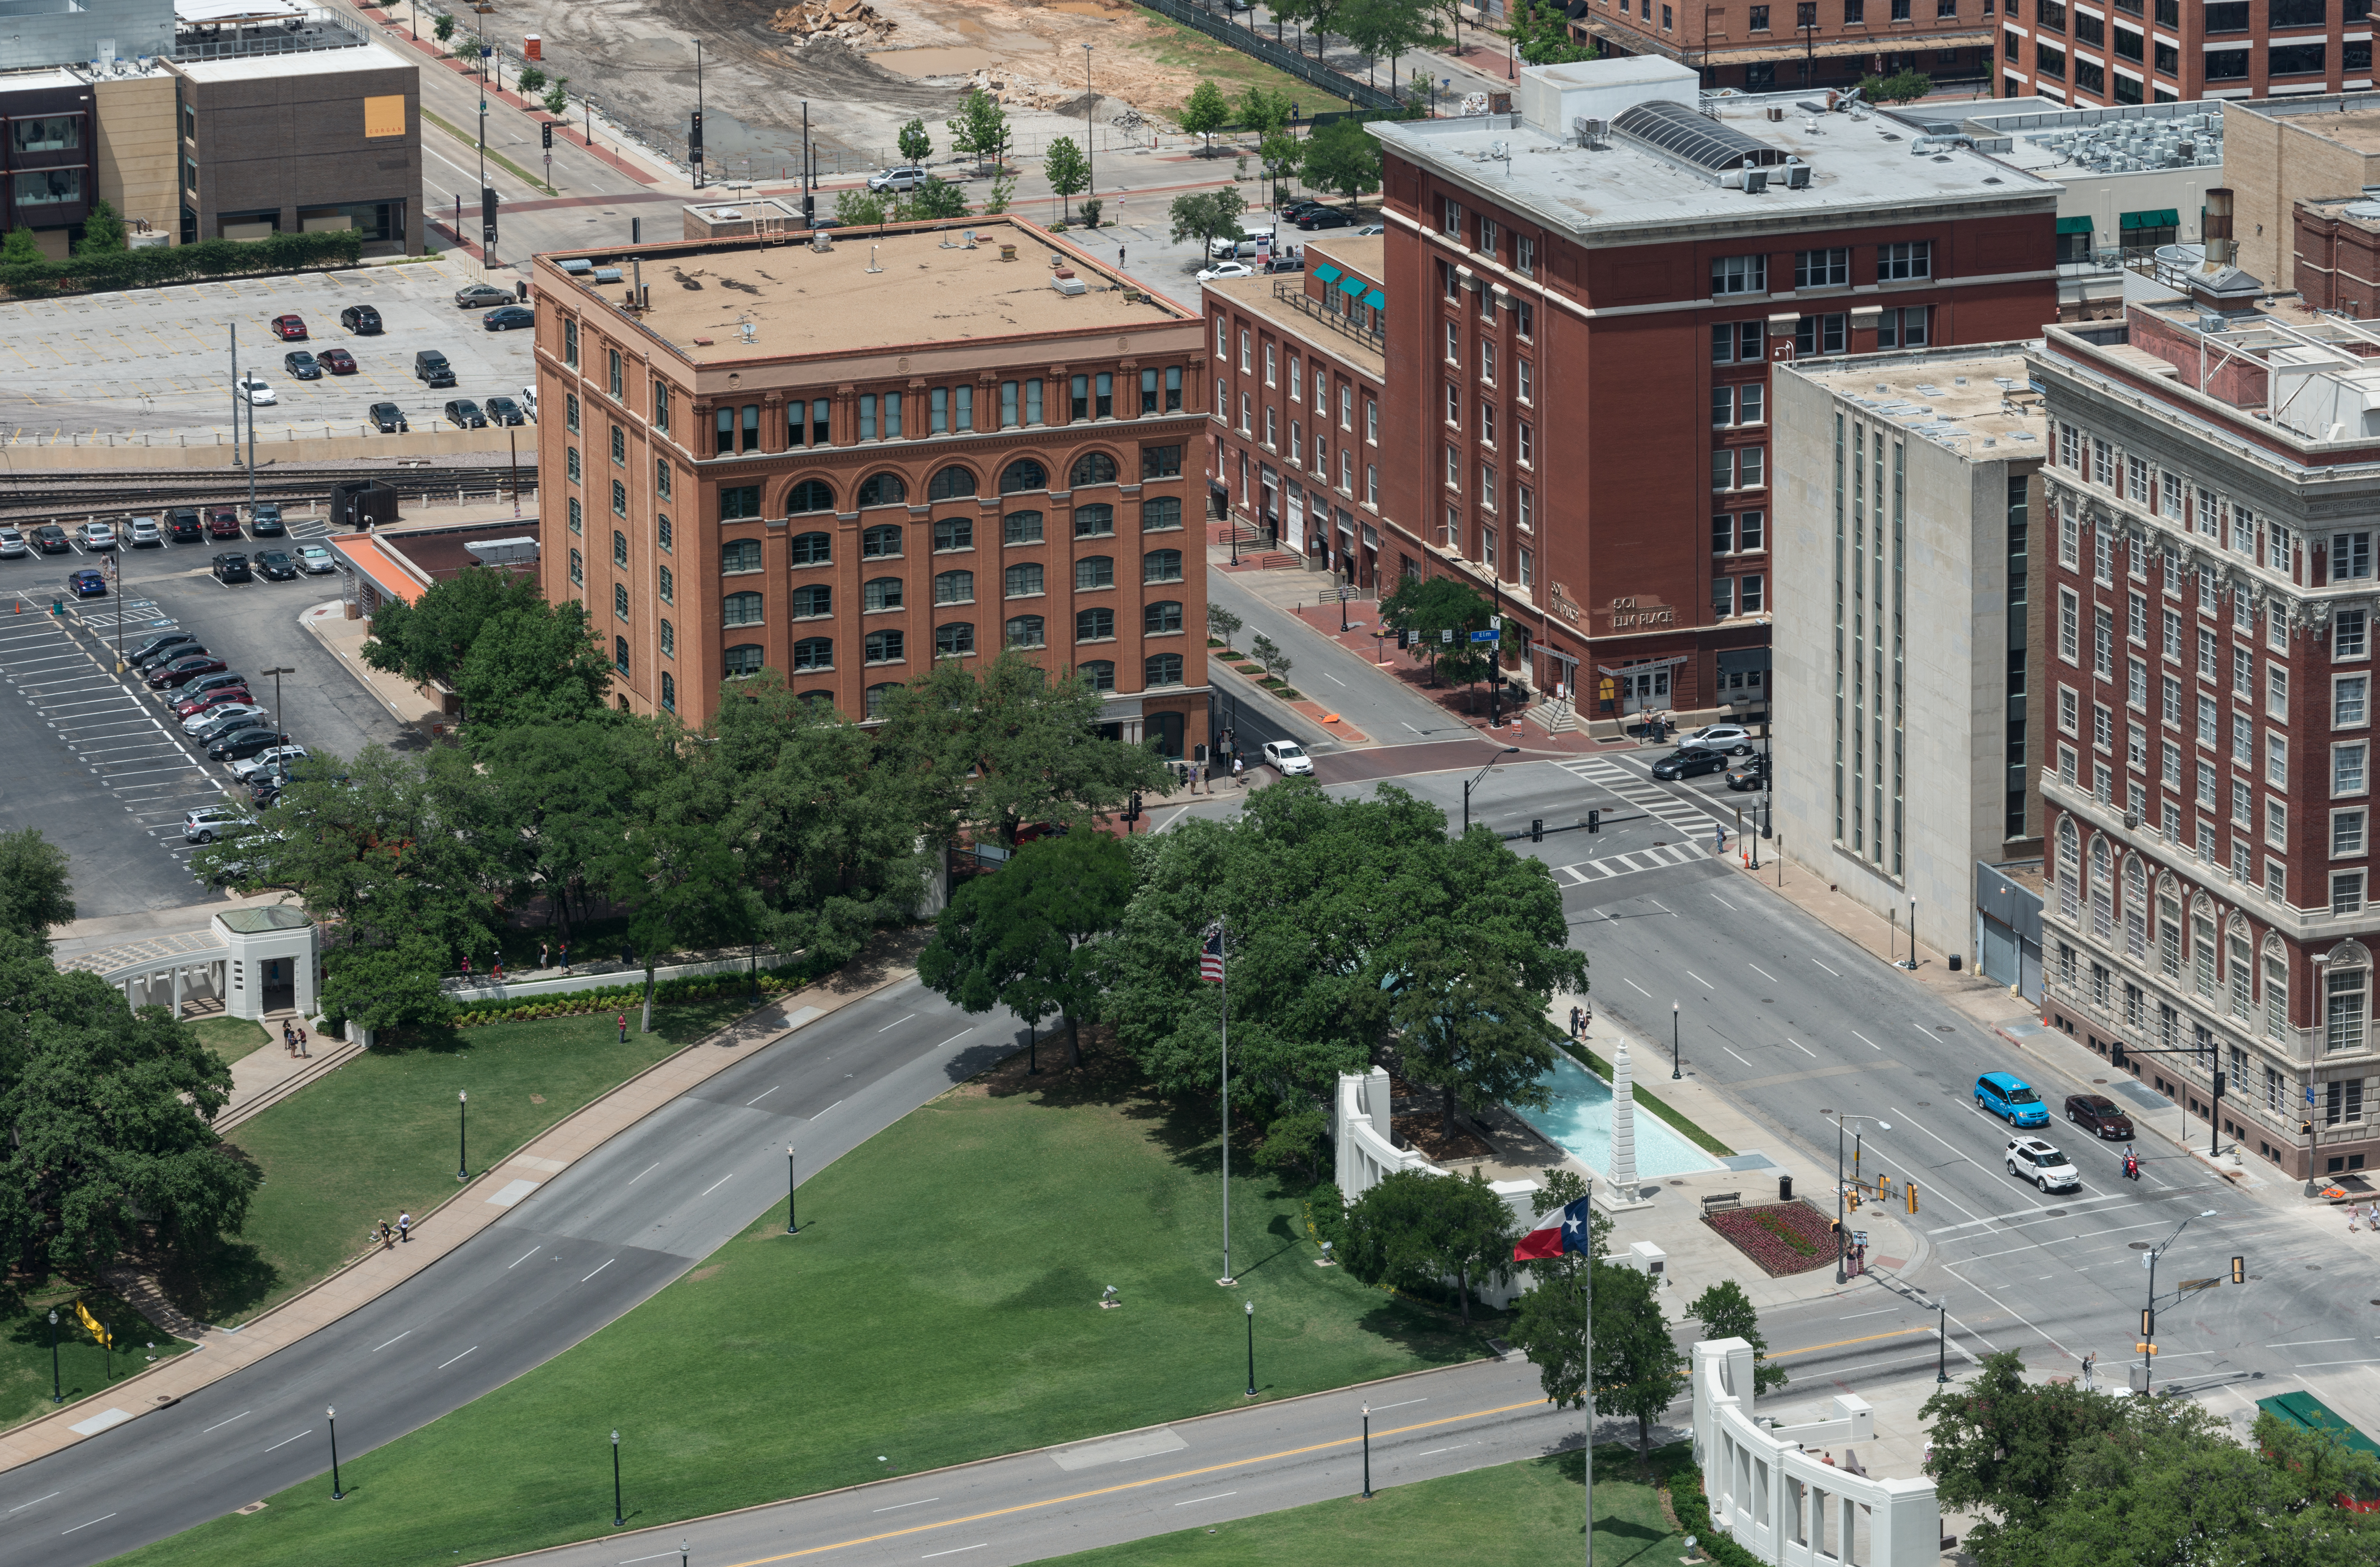 View, in 2014, of Dealey Plaza and the Texas School Book Depository in Dallas, Texas